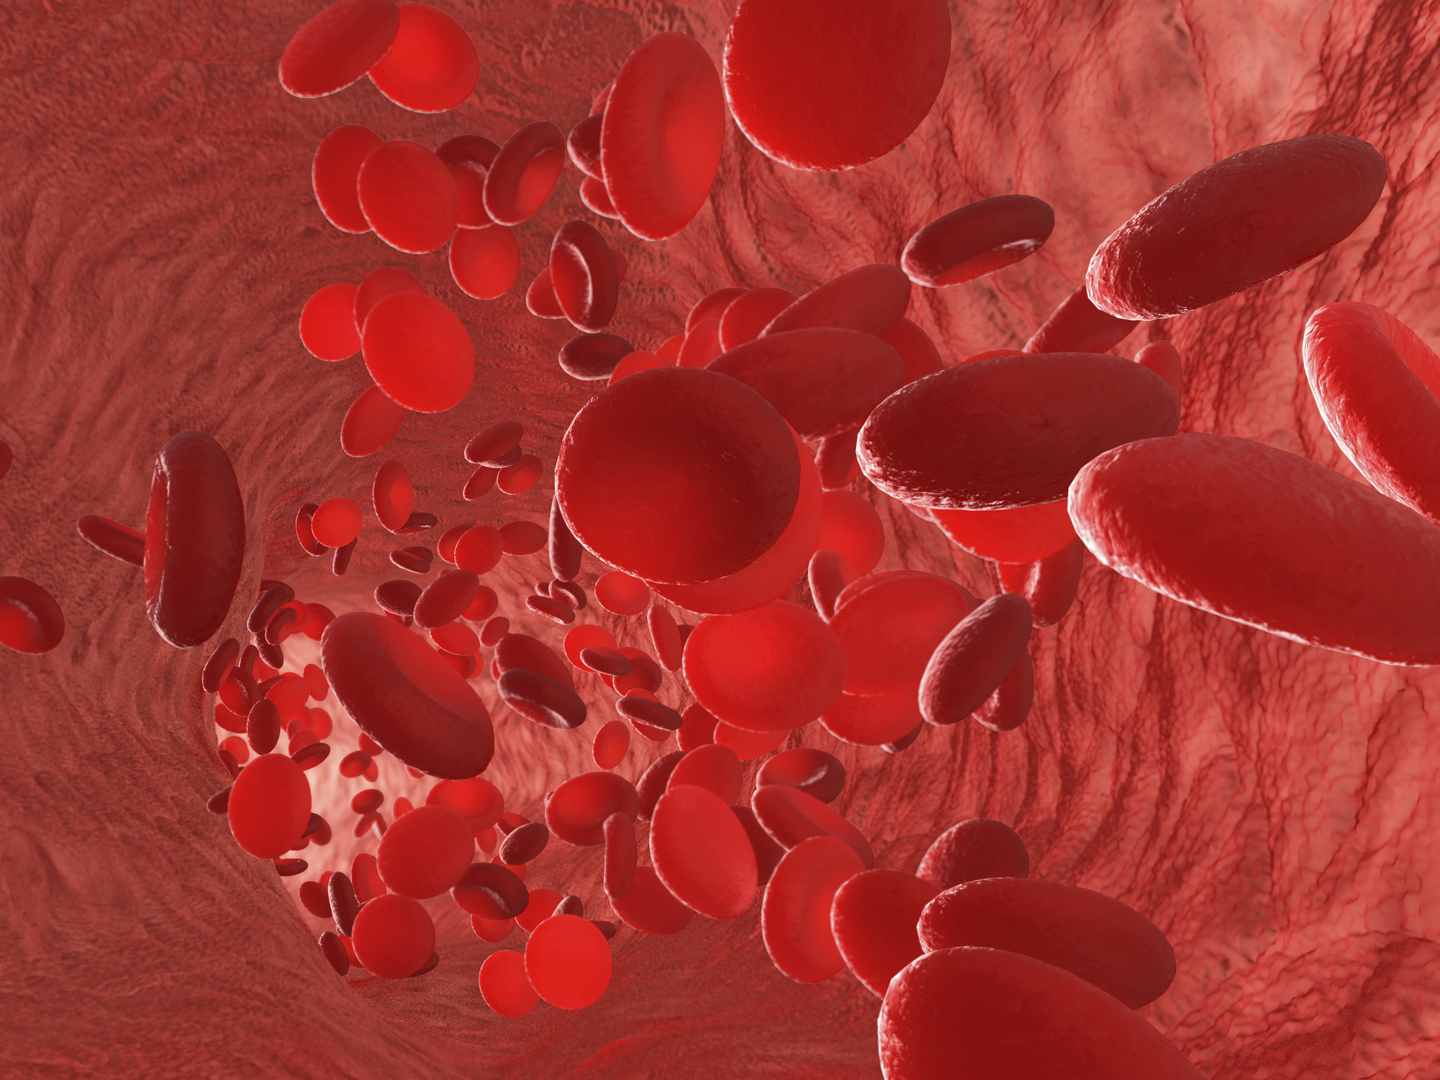 Red blood cells erythrocytes in interior of arterial or capillary blood vessel. Showing endothelial cells and blood flow or stream. Human anatomy model 3D visualization.